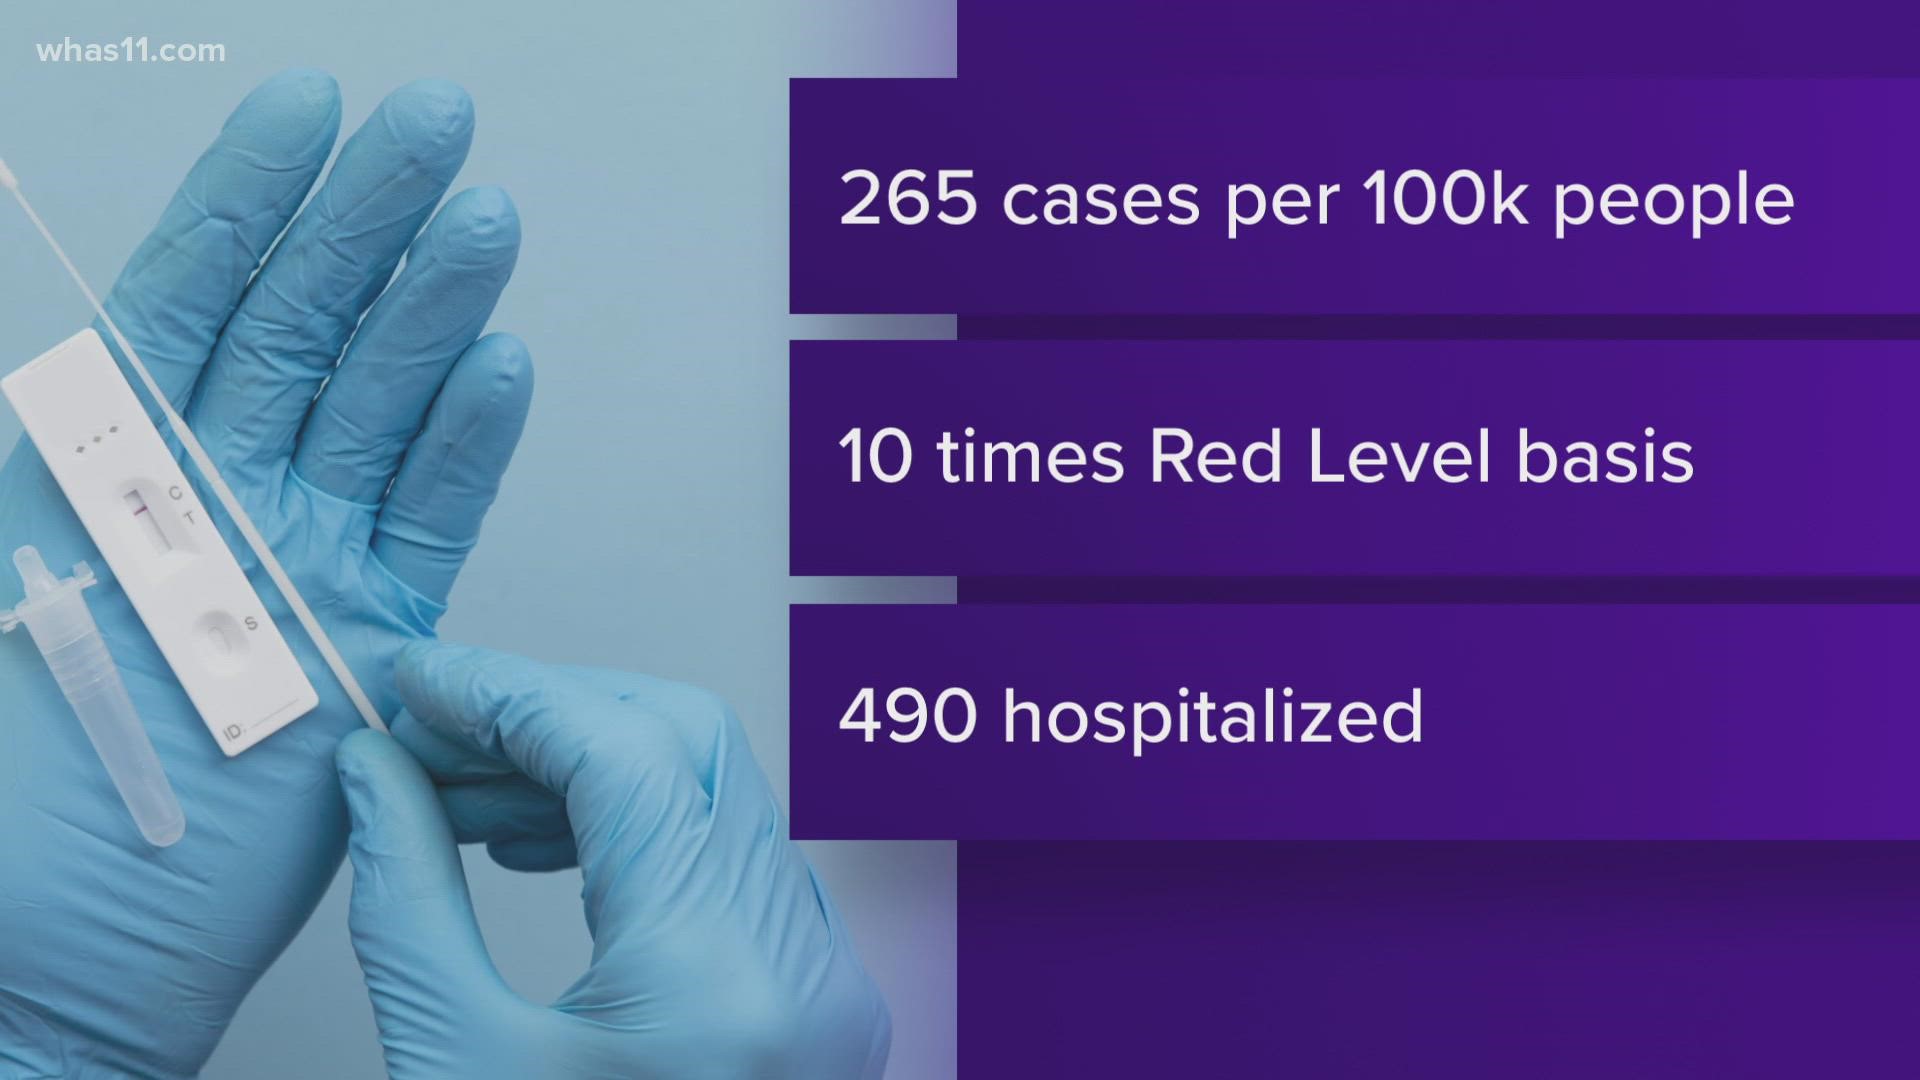 Jefferson County's incidence rate is 10x higher than the "Red" level, with 265 cases per 100,000 people.